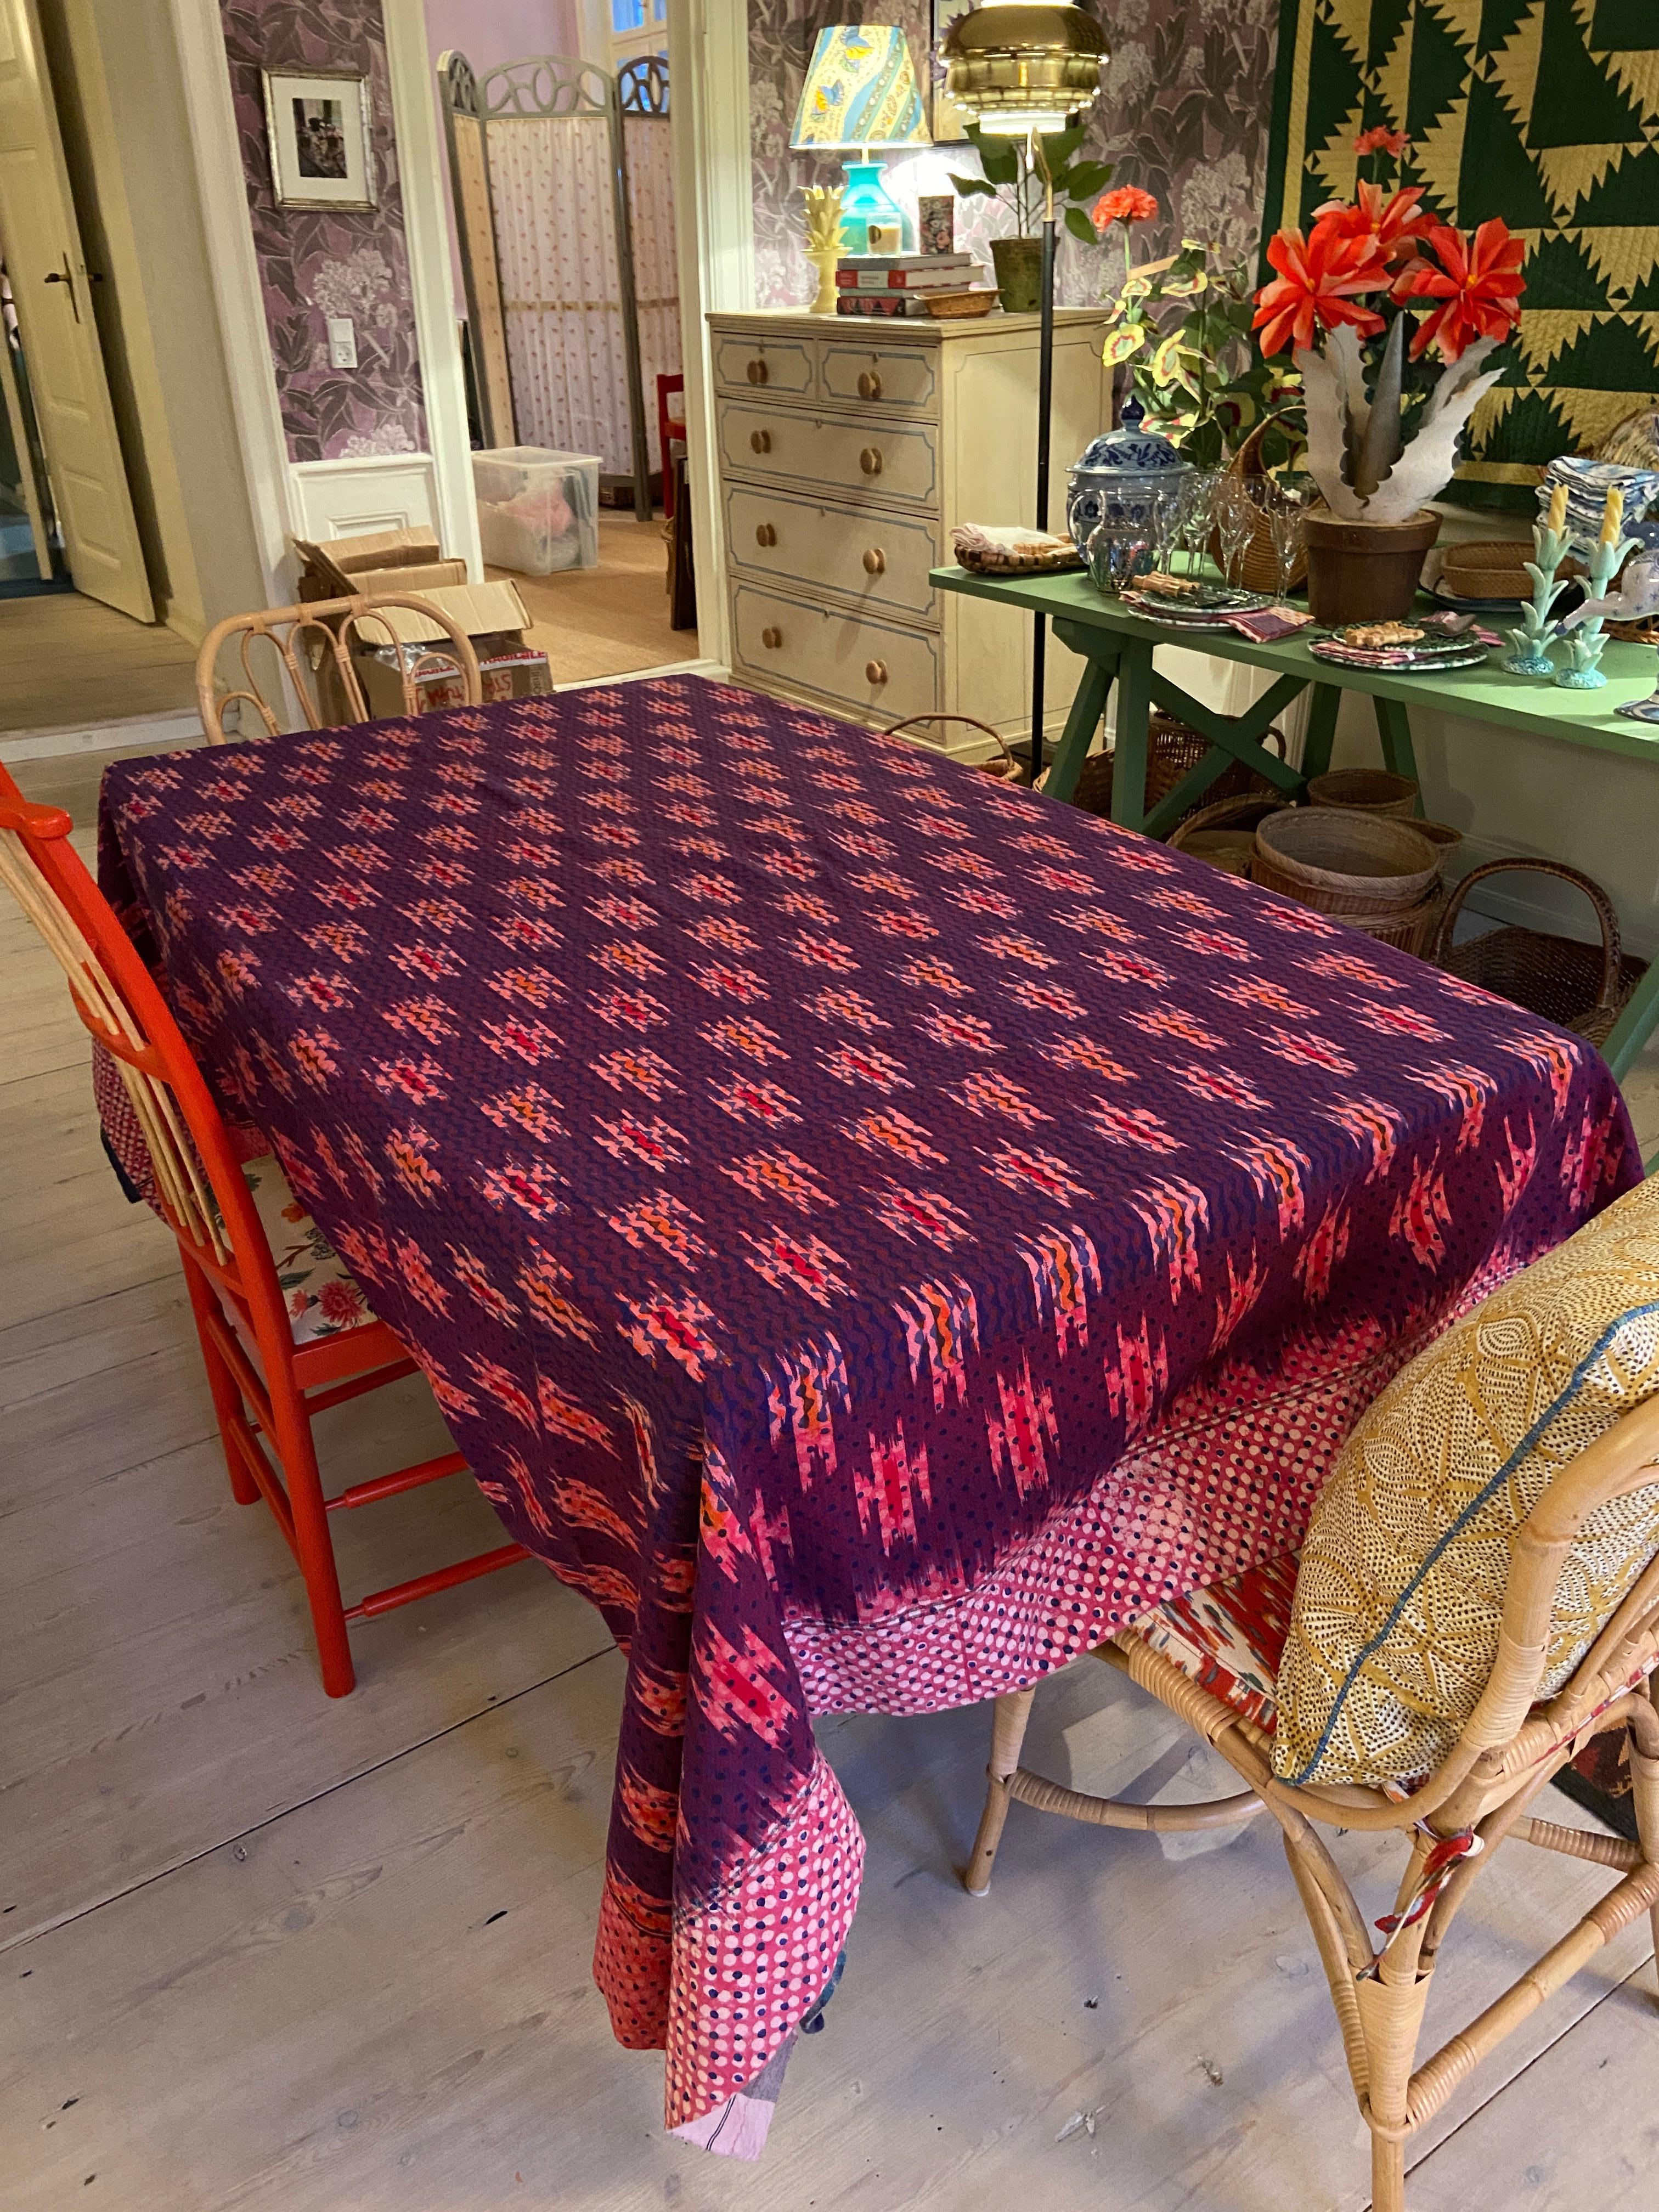 Contemporary Gregory Parkinson Tablecloth Purple Pink Ikat Hand-Blocked Patterns 1